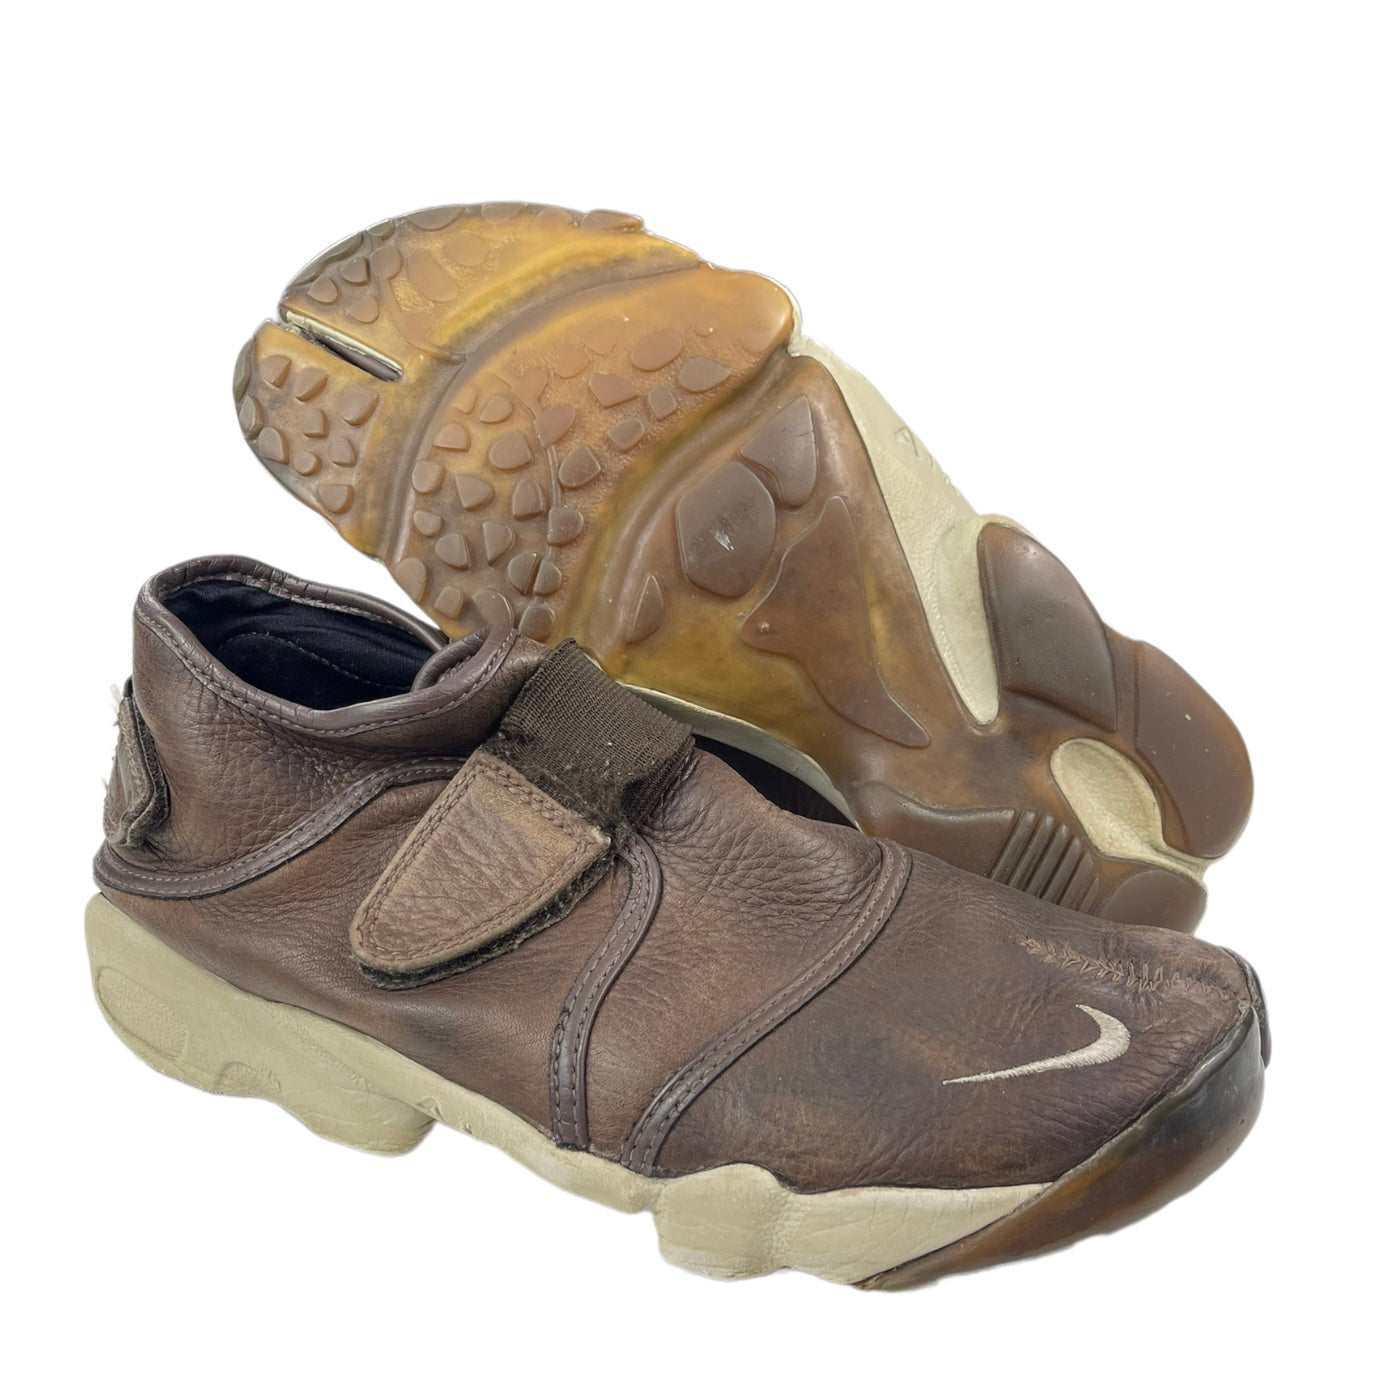 2002 Nike Air Rift leather cover 